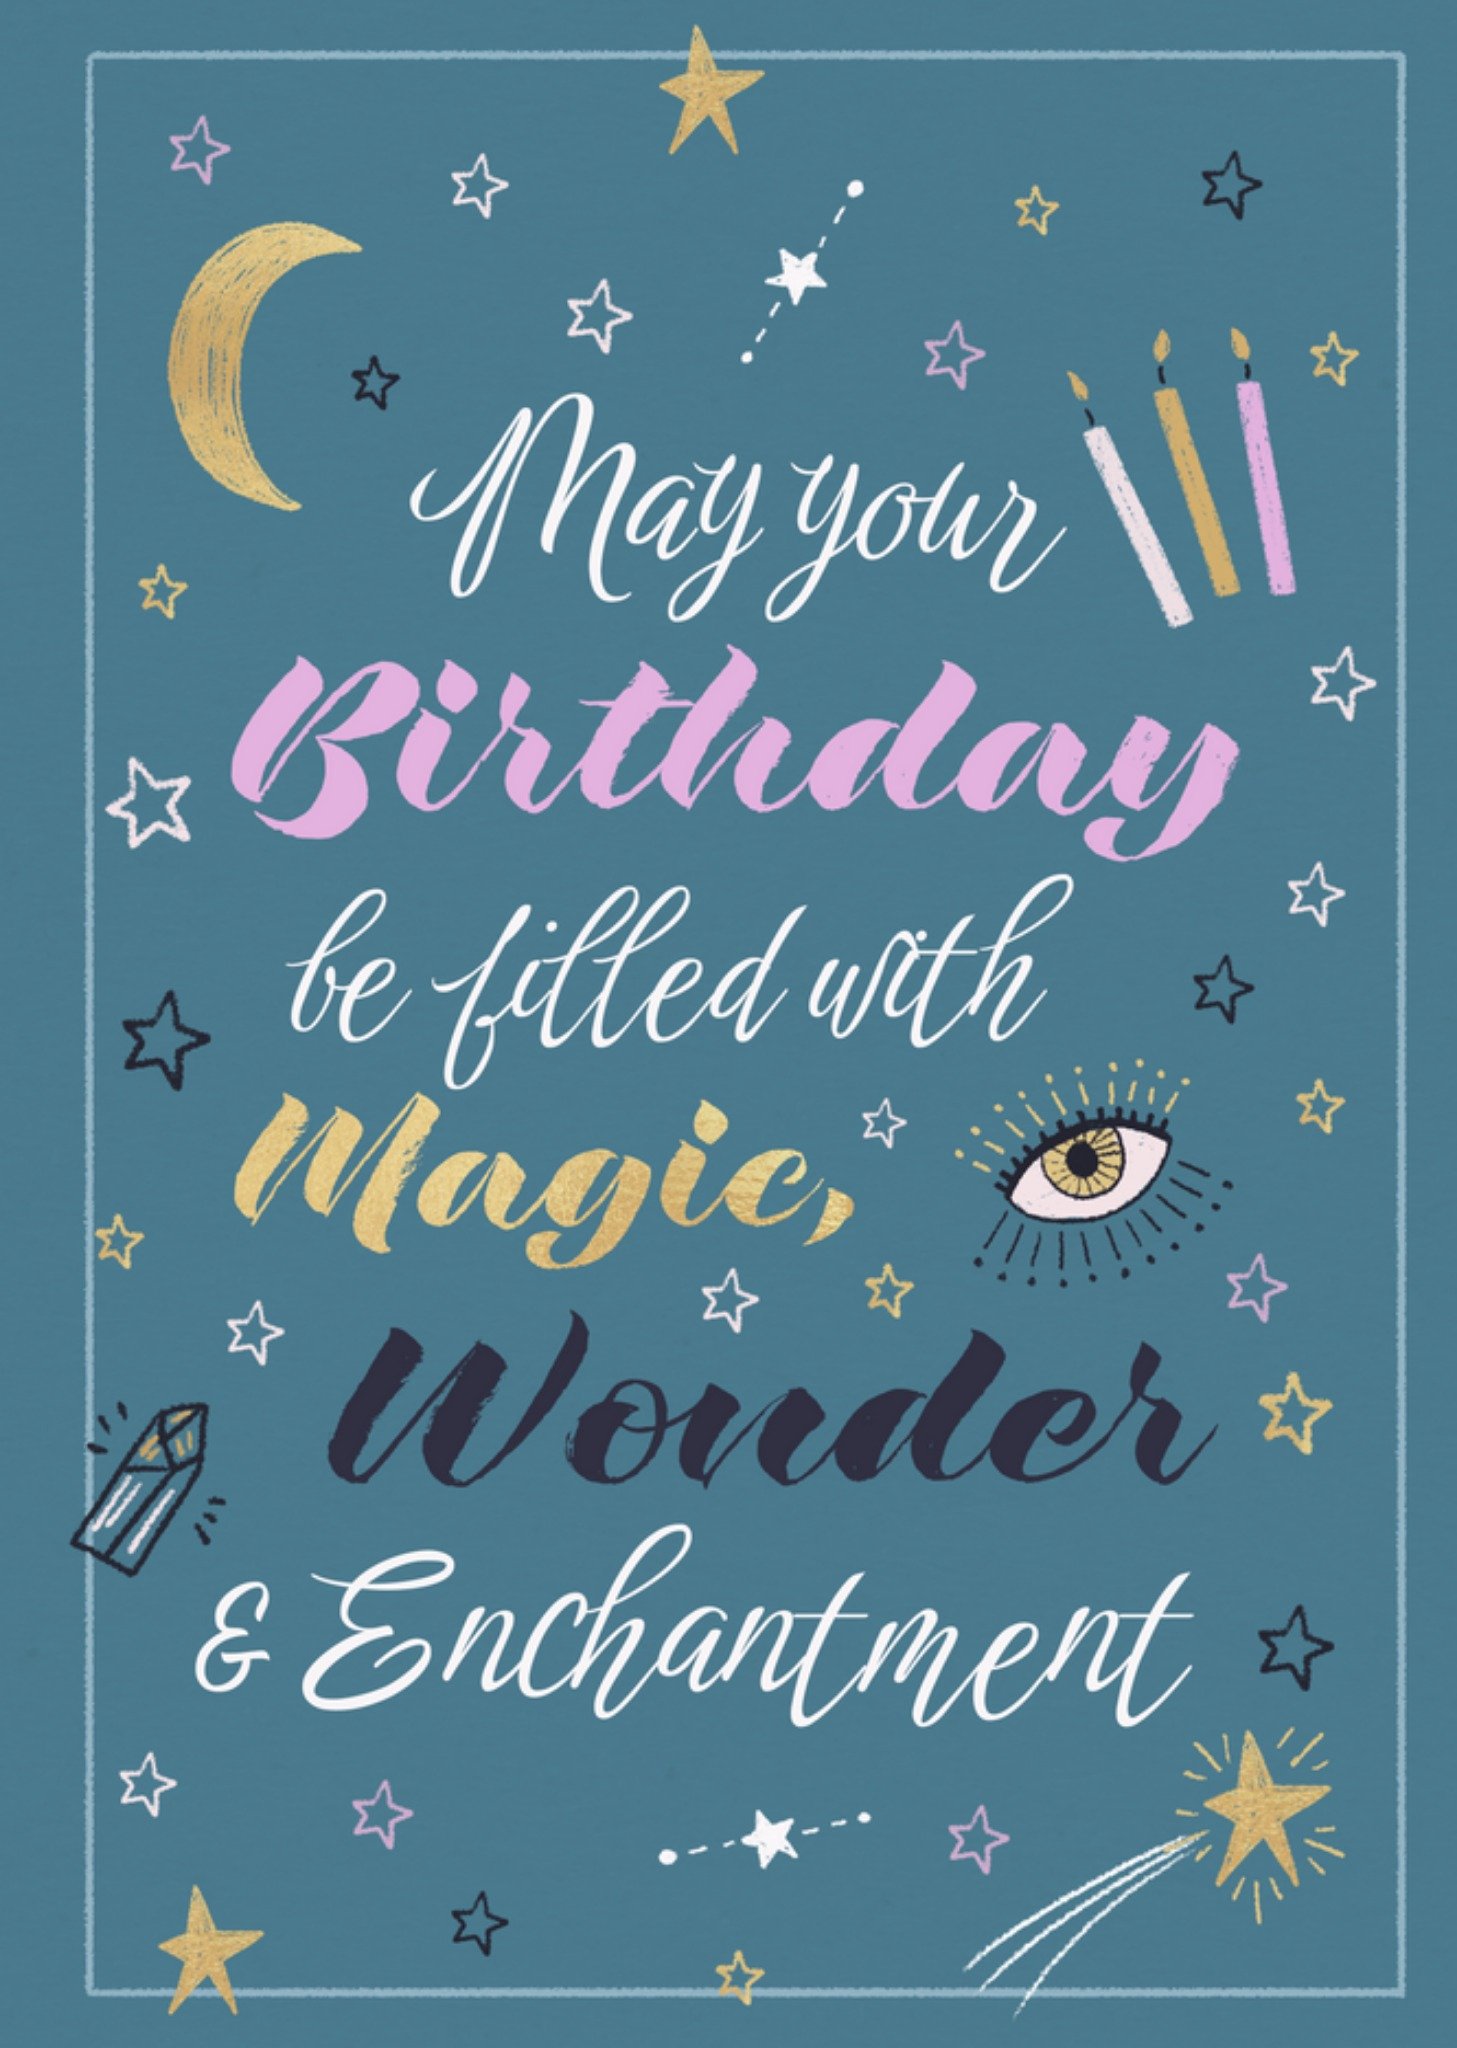 Friends Mystical Magic Wonder And Enchantment Illustrated Calligraphy Birthday Card Ecard